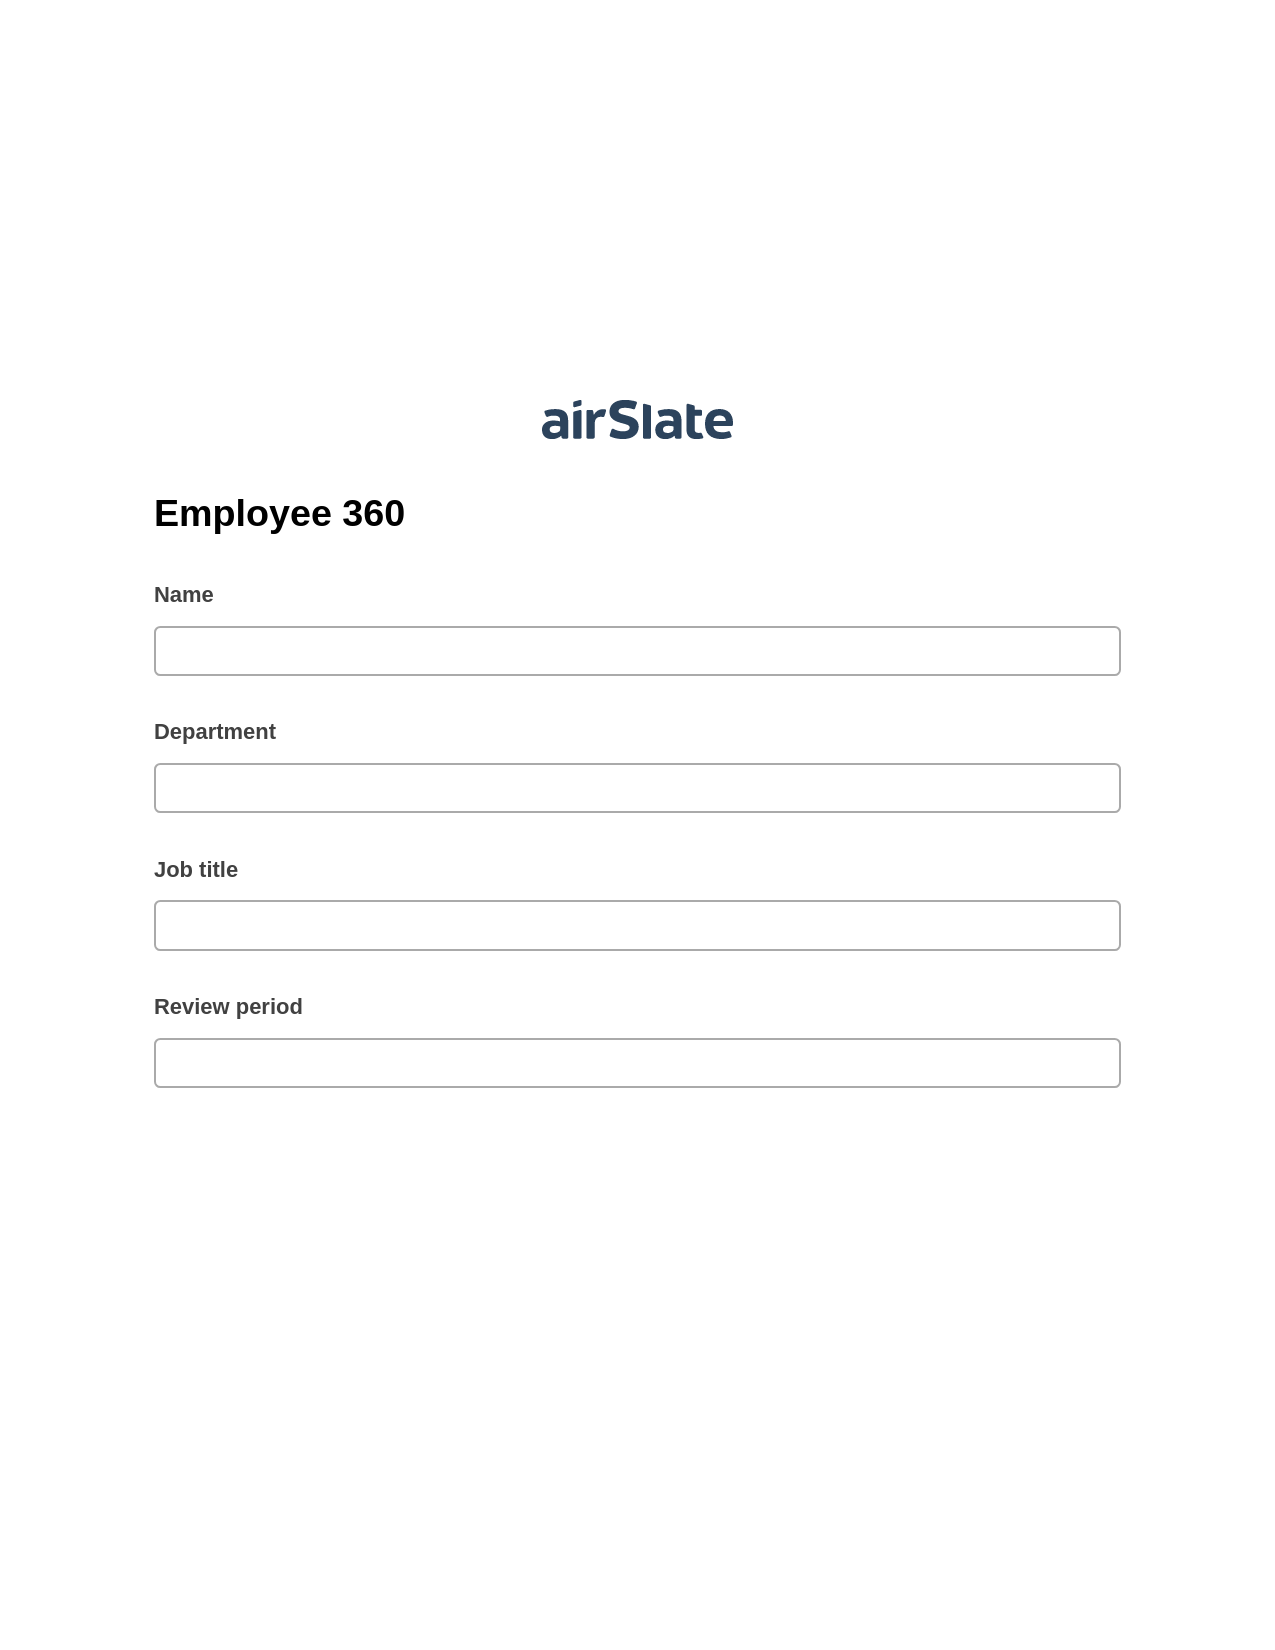 Multirole Employee 360 Pre-fill Dropdowns from Airtable, Invoke Salesforce Process Bot, Export to Salesforce Record Bot